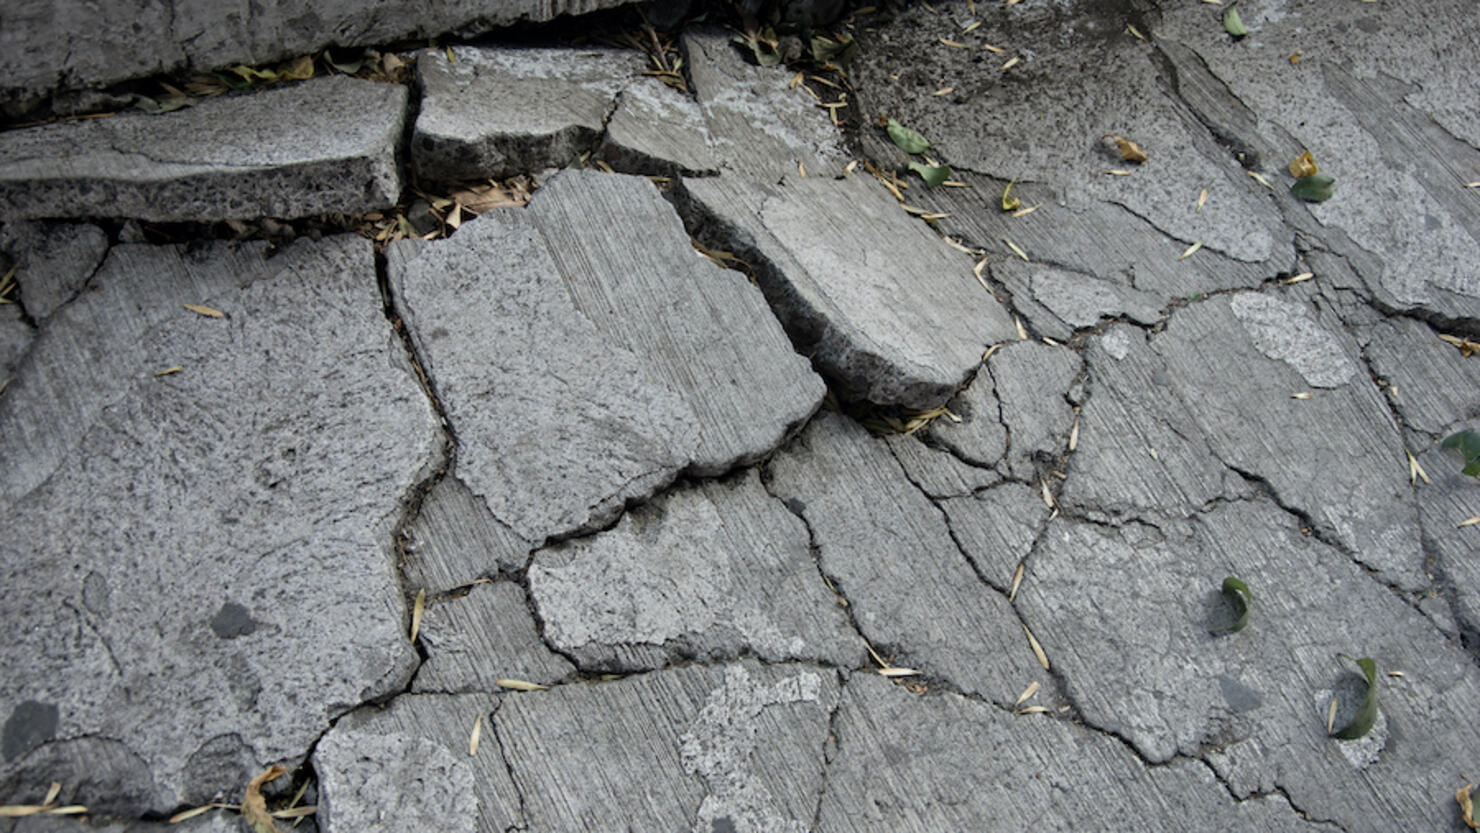 Severely cracked and lifted concrete footpath